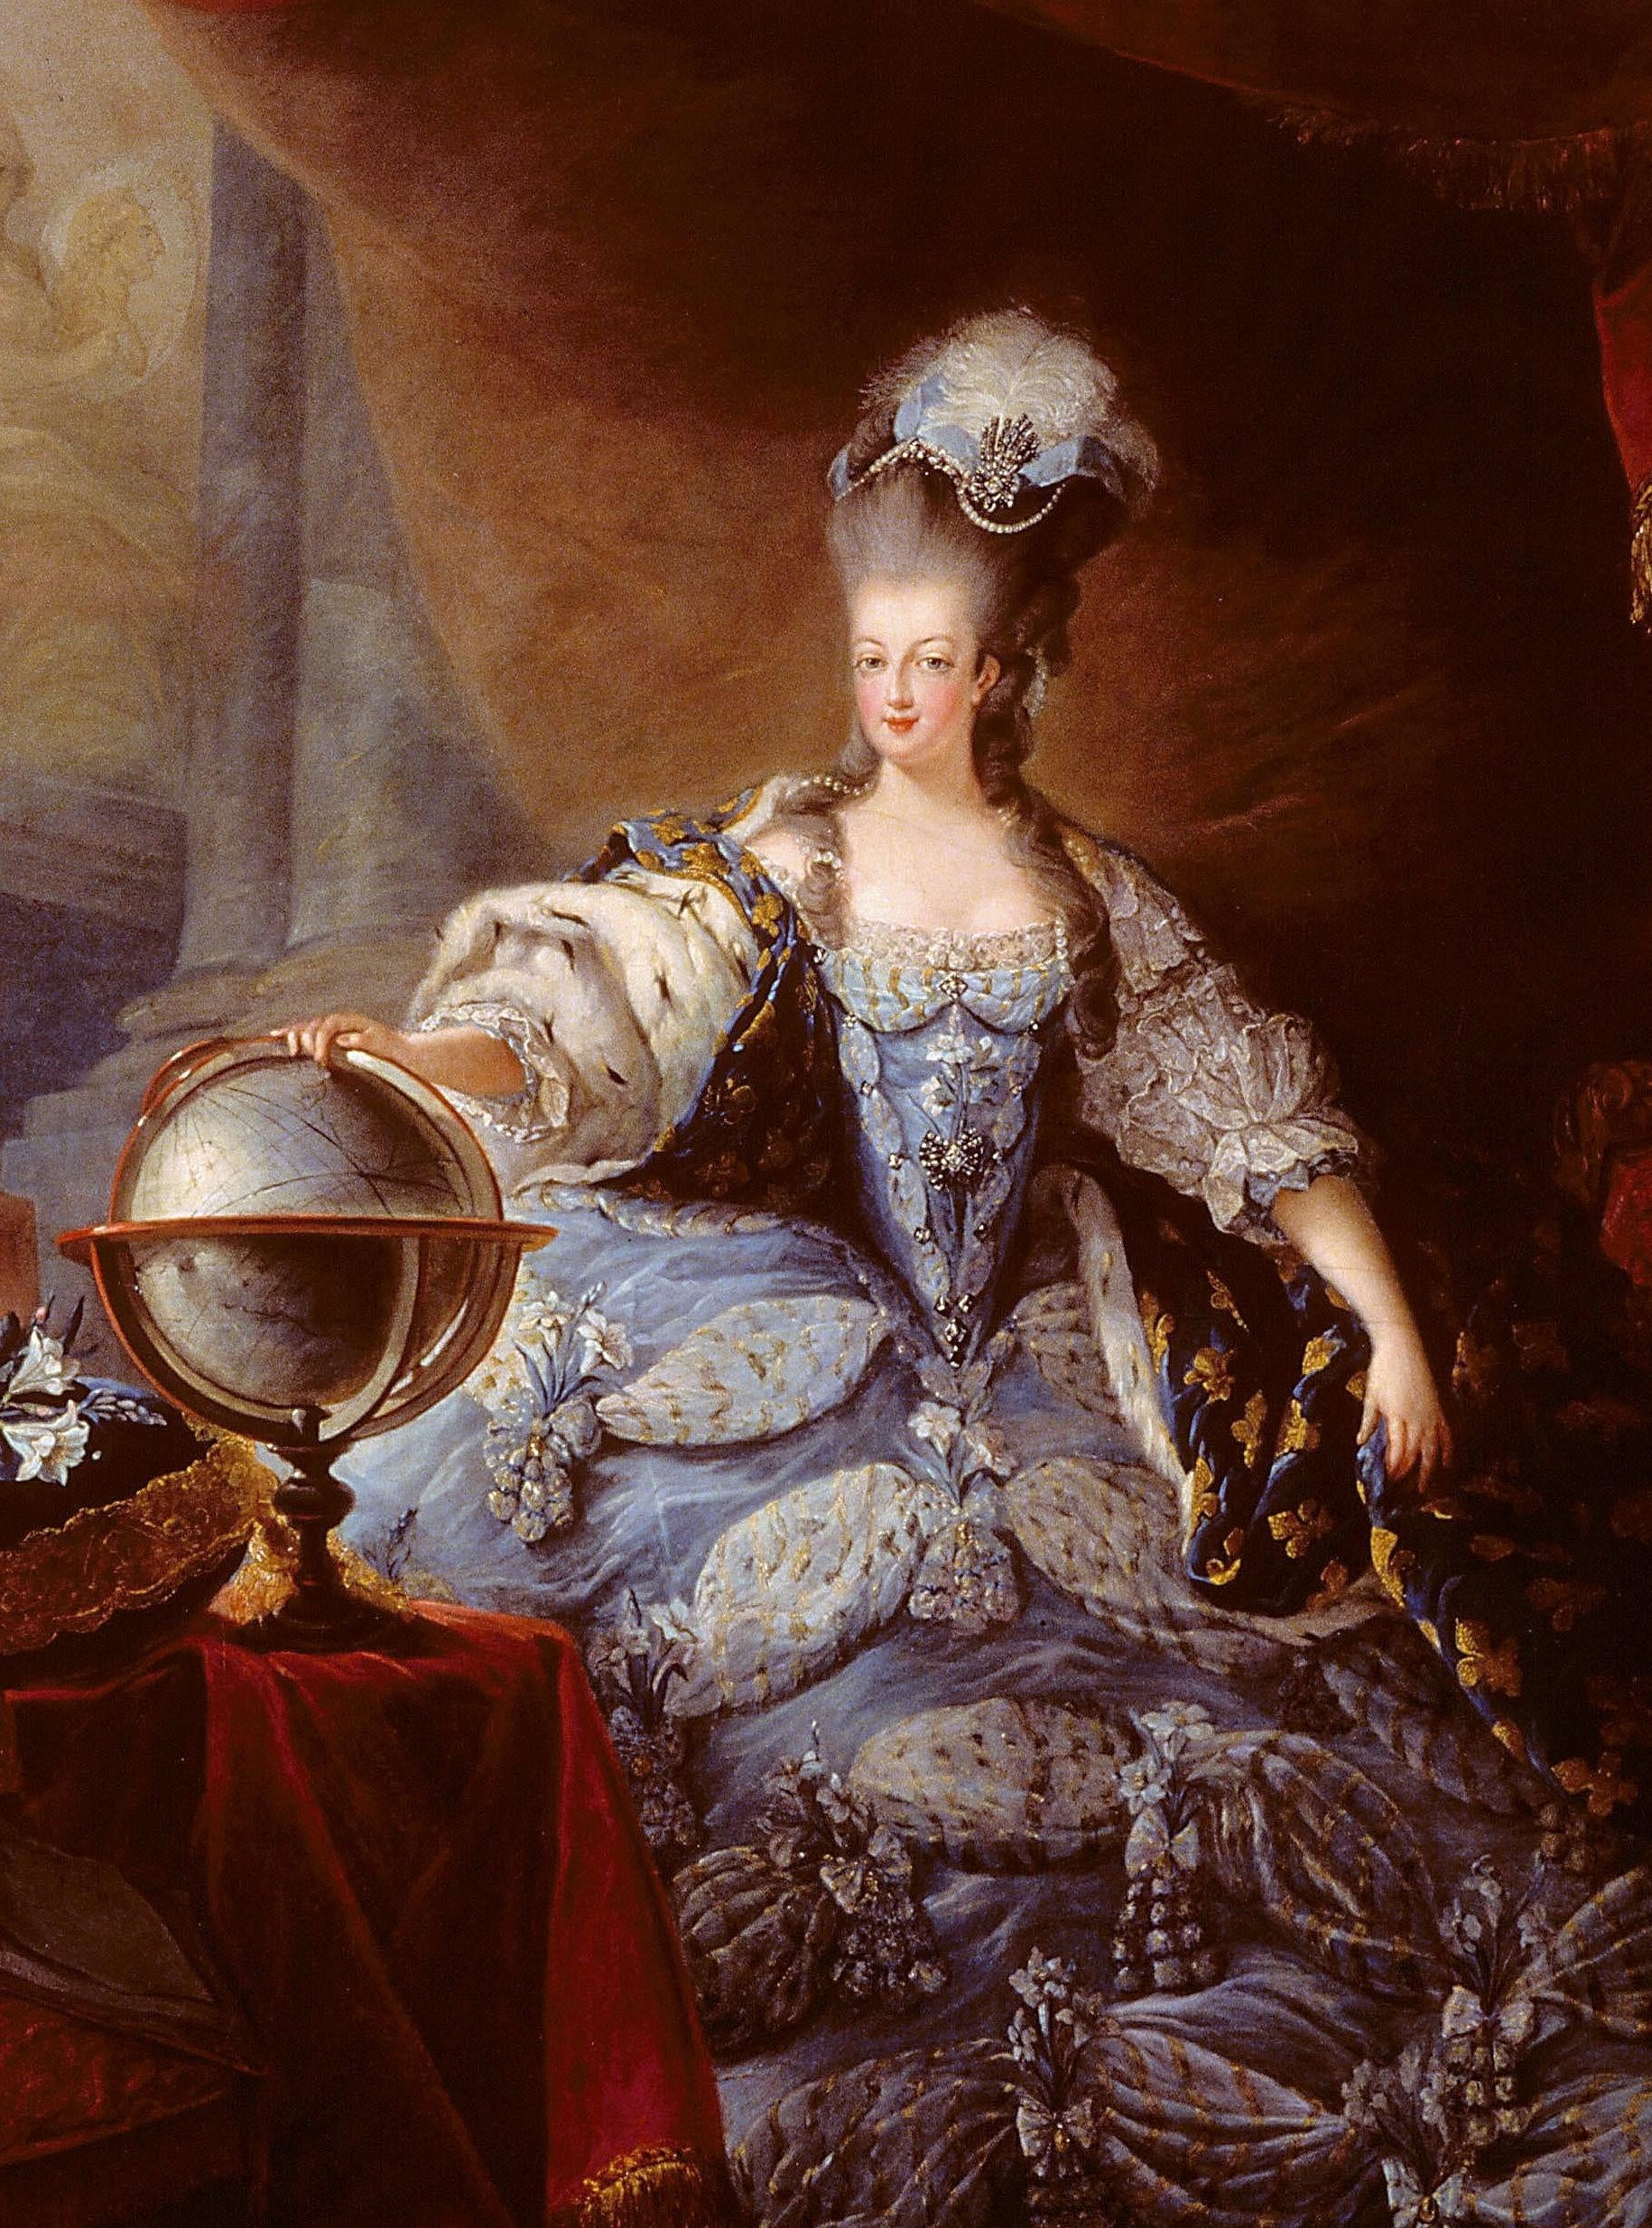 X-Rays Reveal Censored Messages Between Marie Antoinette and Her ‘Tender Friend’